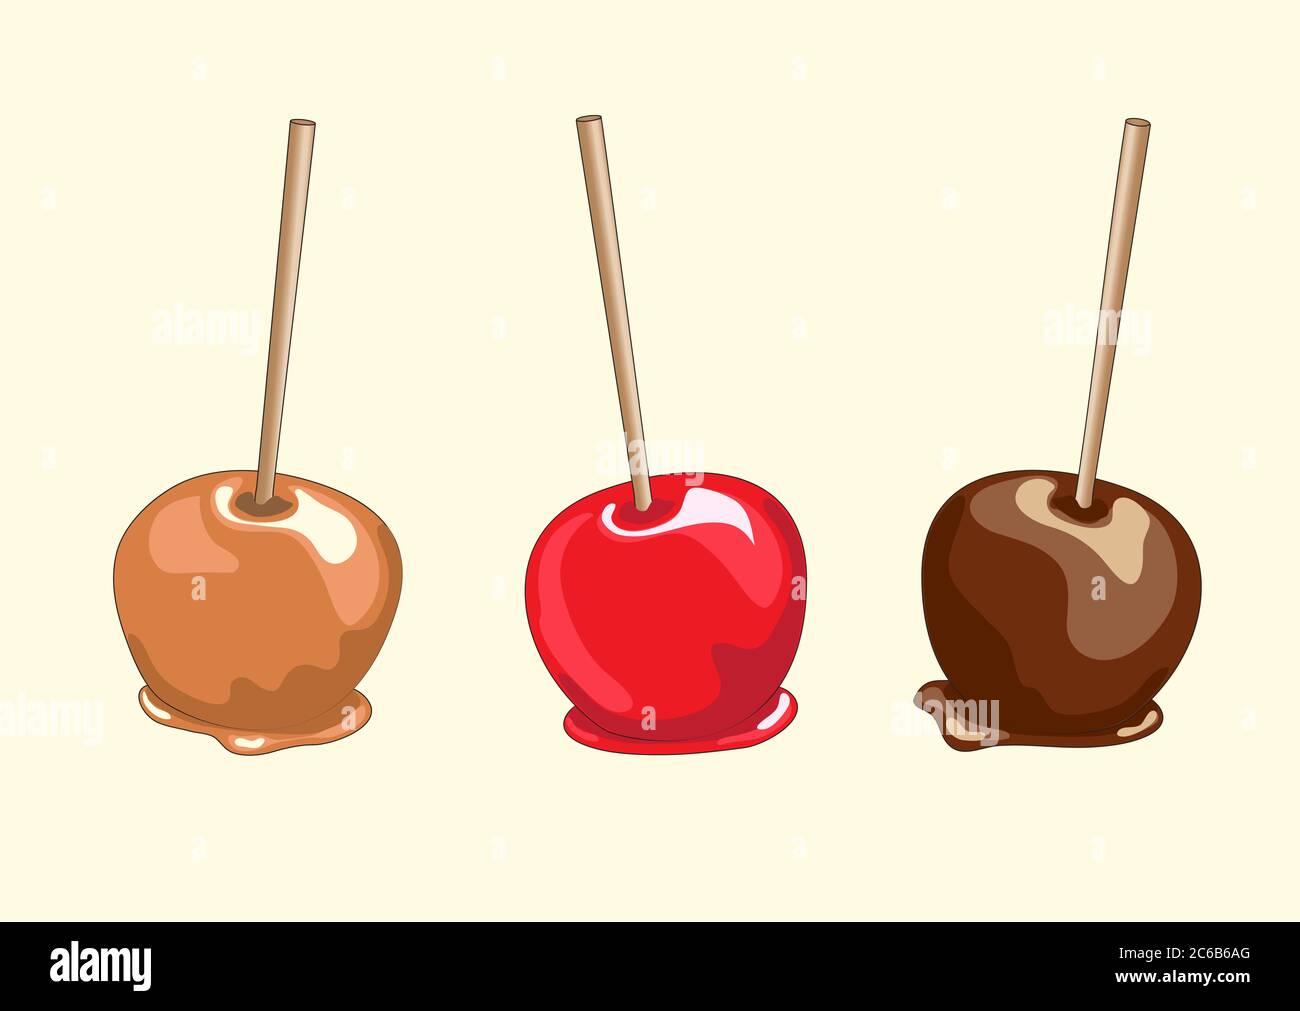 Candy apples. Chocolate, caramel and toffee candy apples isolated. EPS10 vector format. Stock Vector